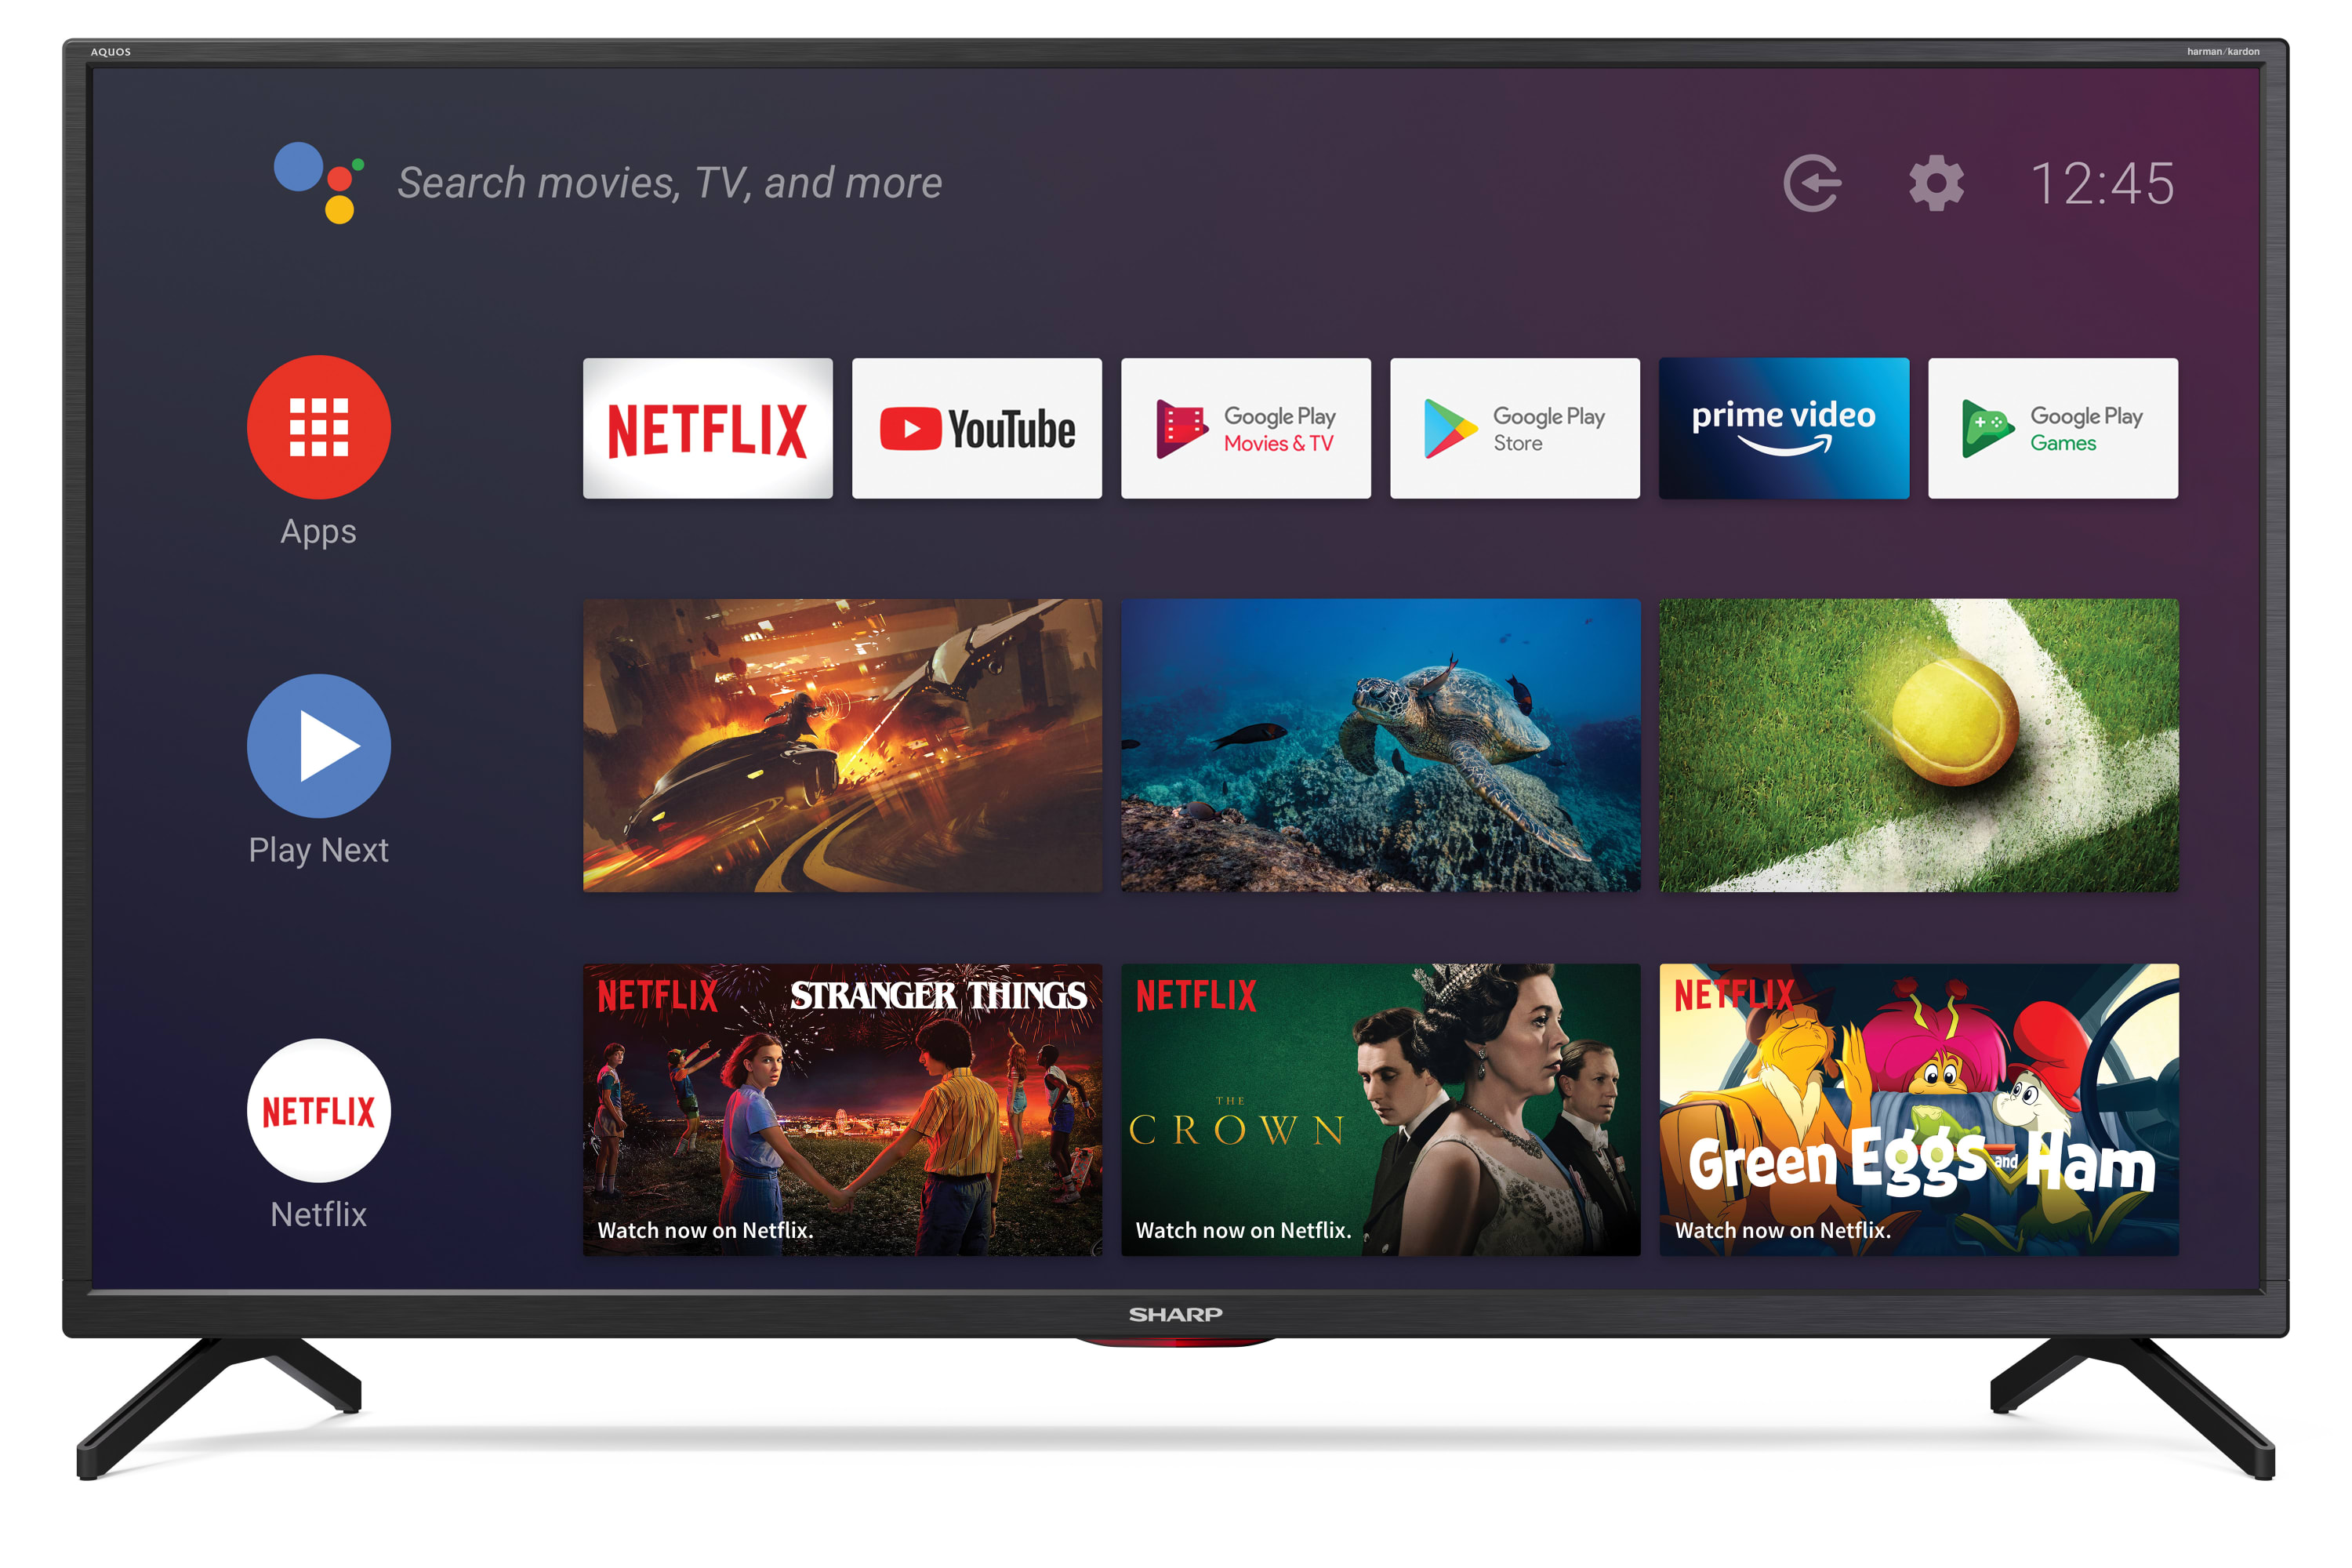 Android TV 4K UHD - 40" 4K ULTRA HD ANDROID TV™